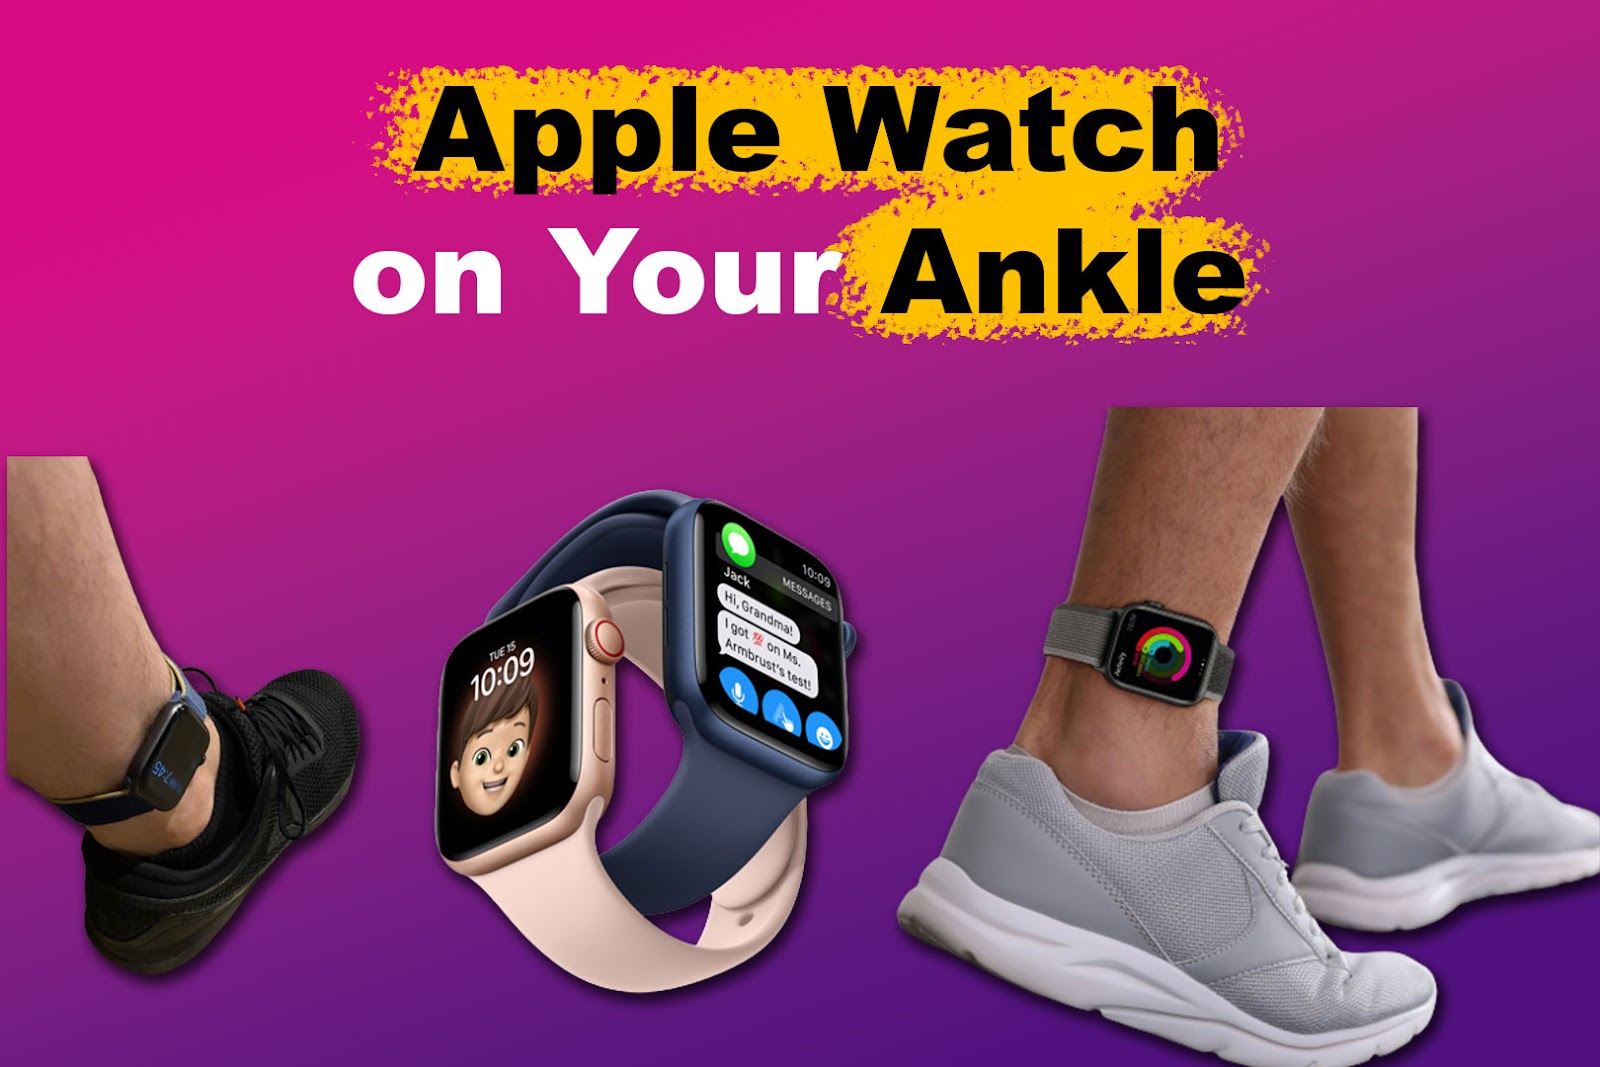 Ankle monitor of the future, Joe Burrow update | Daily Briefing